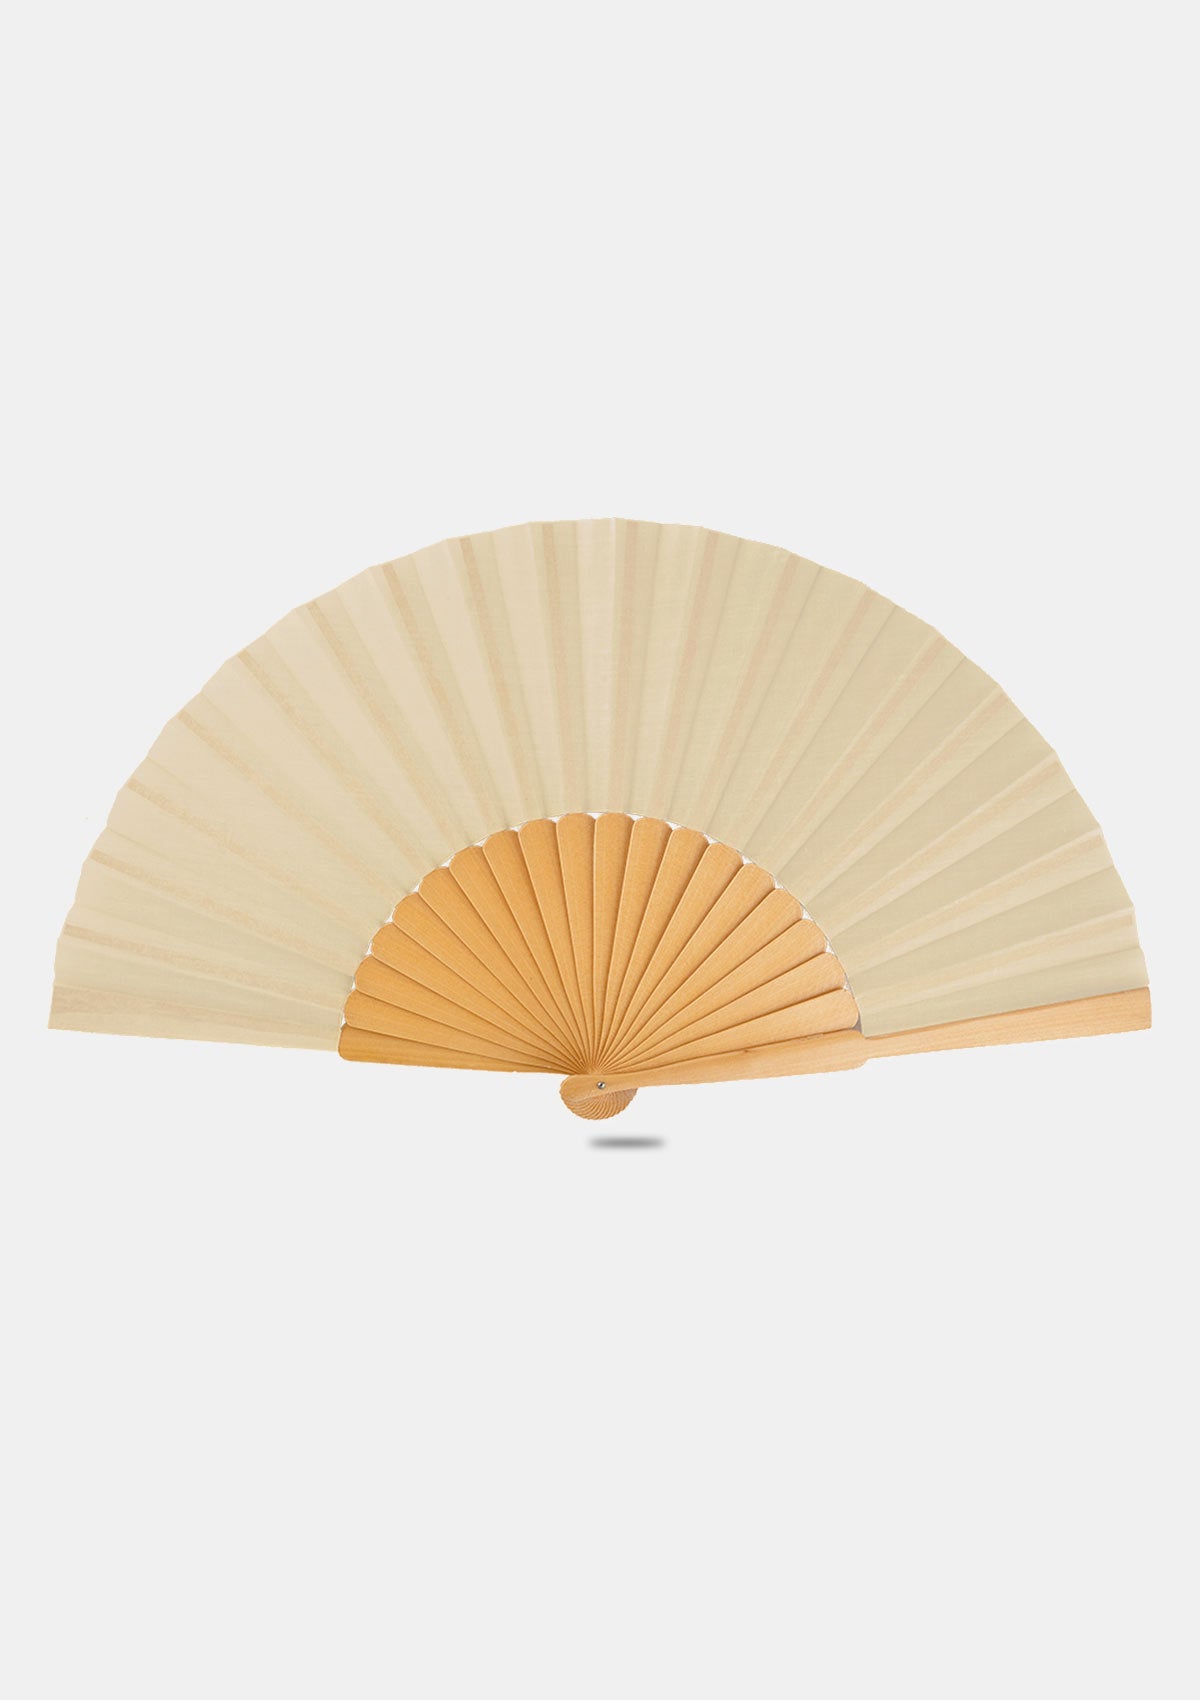 Large wood hand fan pericon